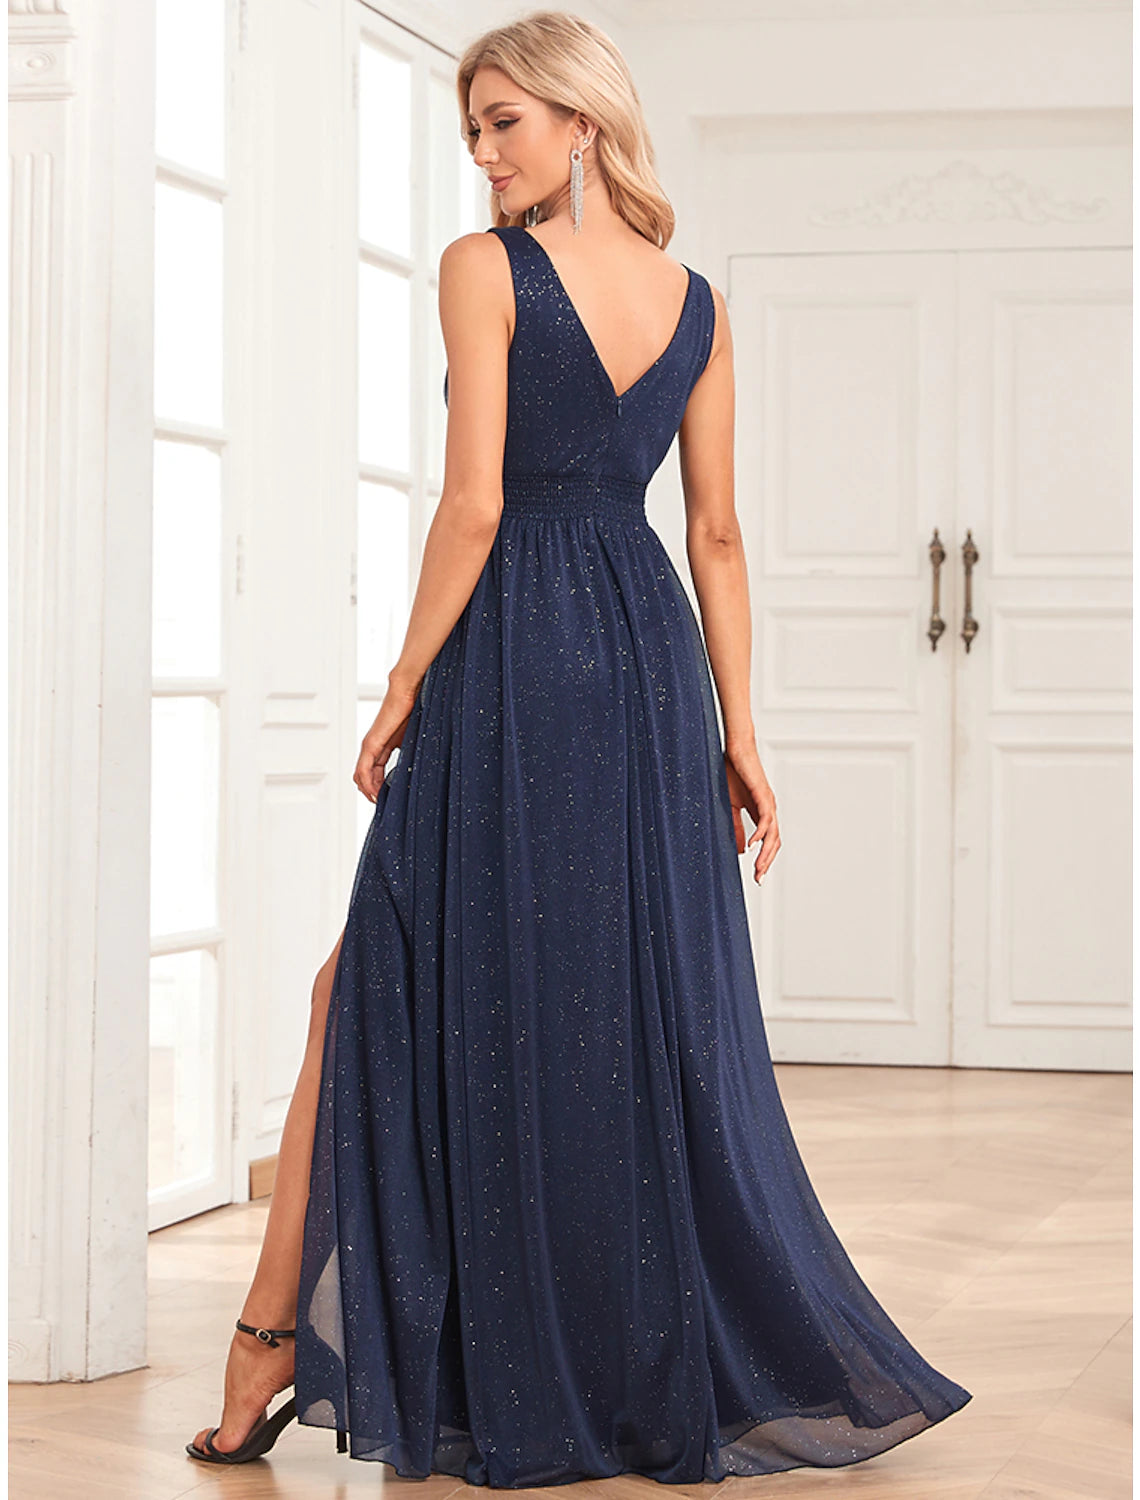 A-Line Evening Gown Empire Dress Wedding Guest Party Wear Floor Length Sleeveless V Neck Spandex V Back with Glitter Slit